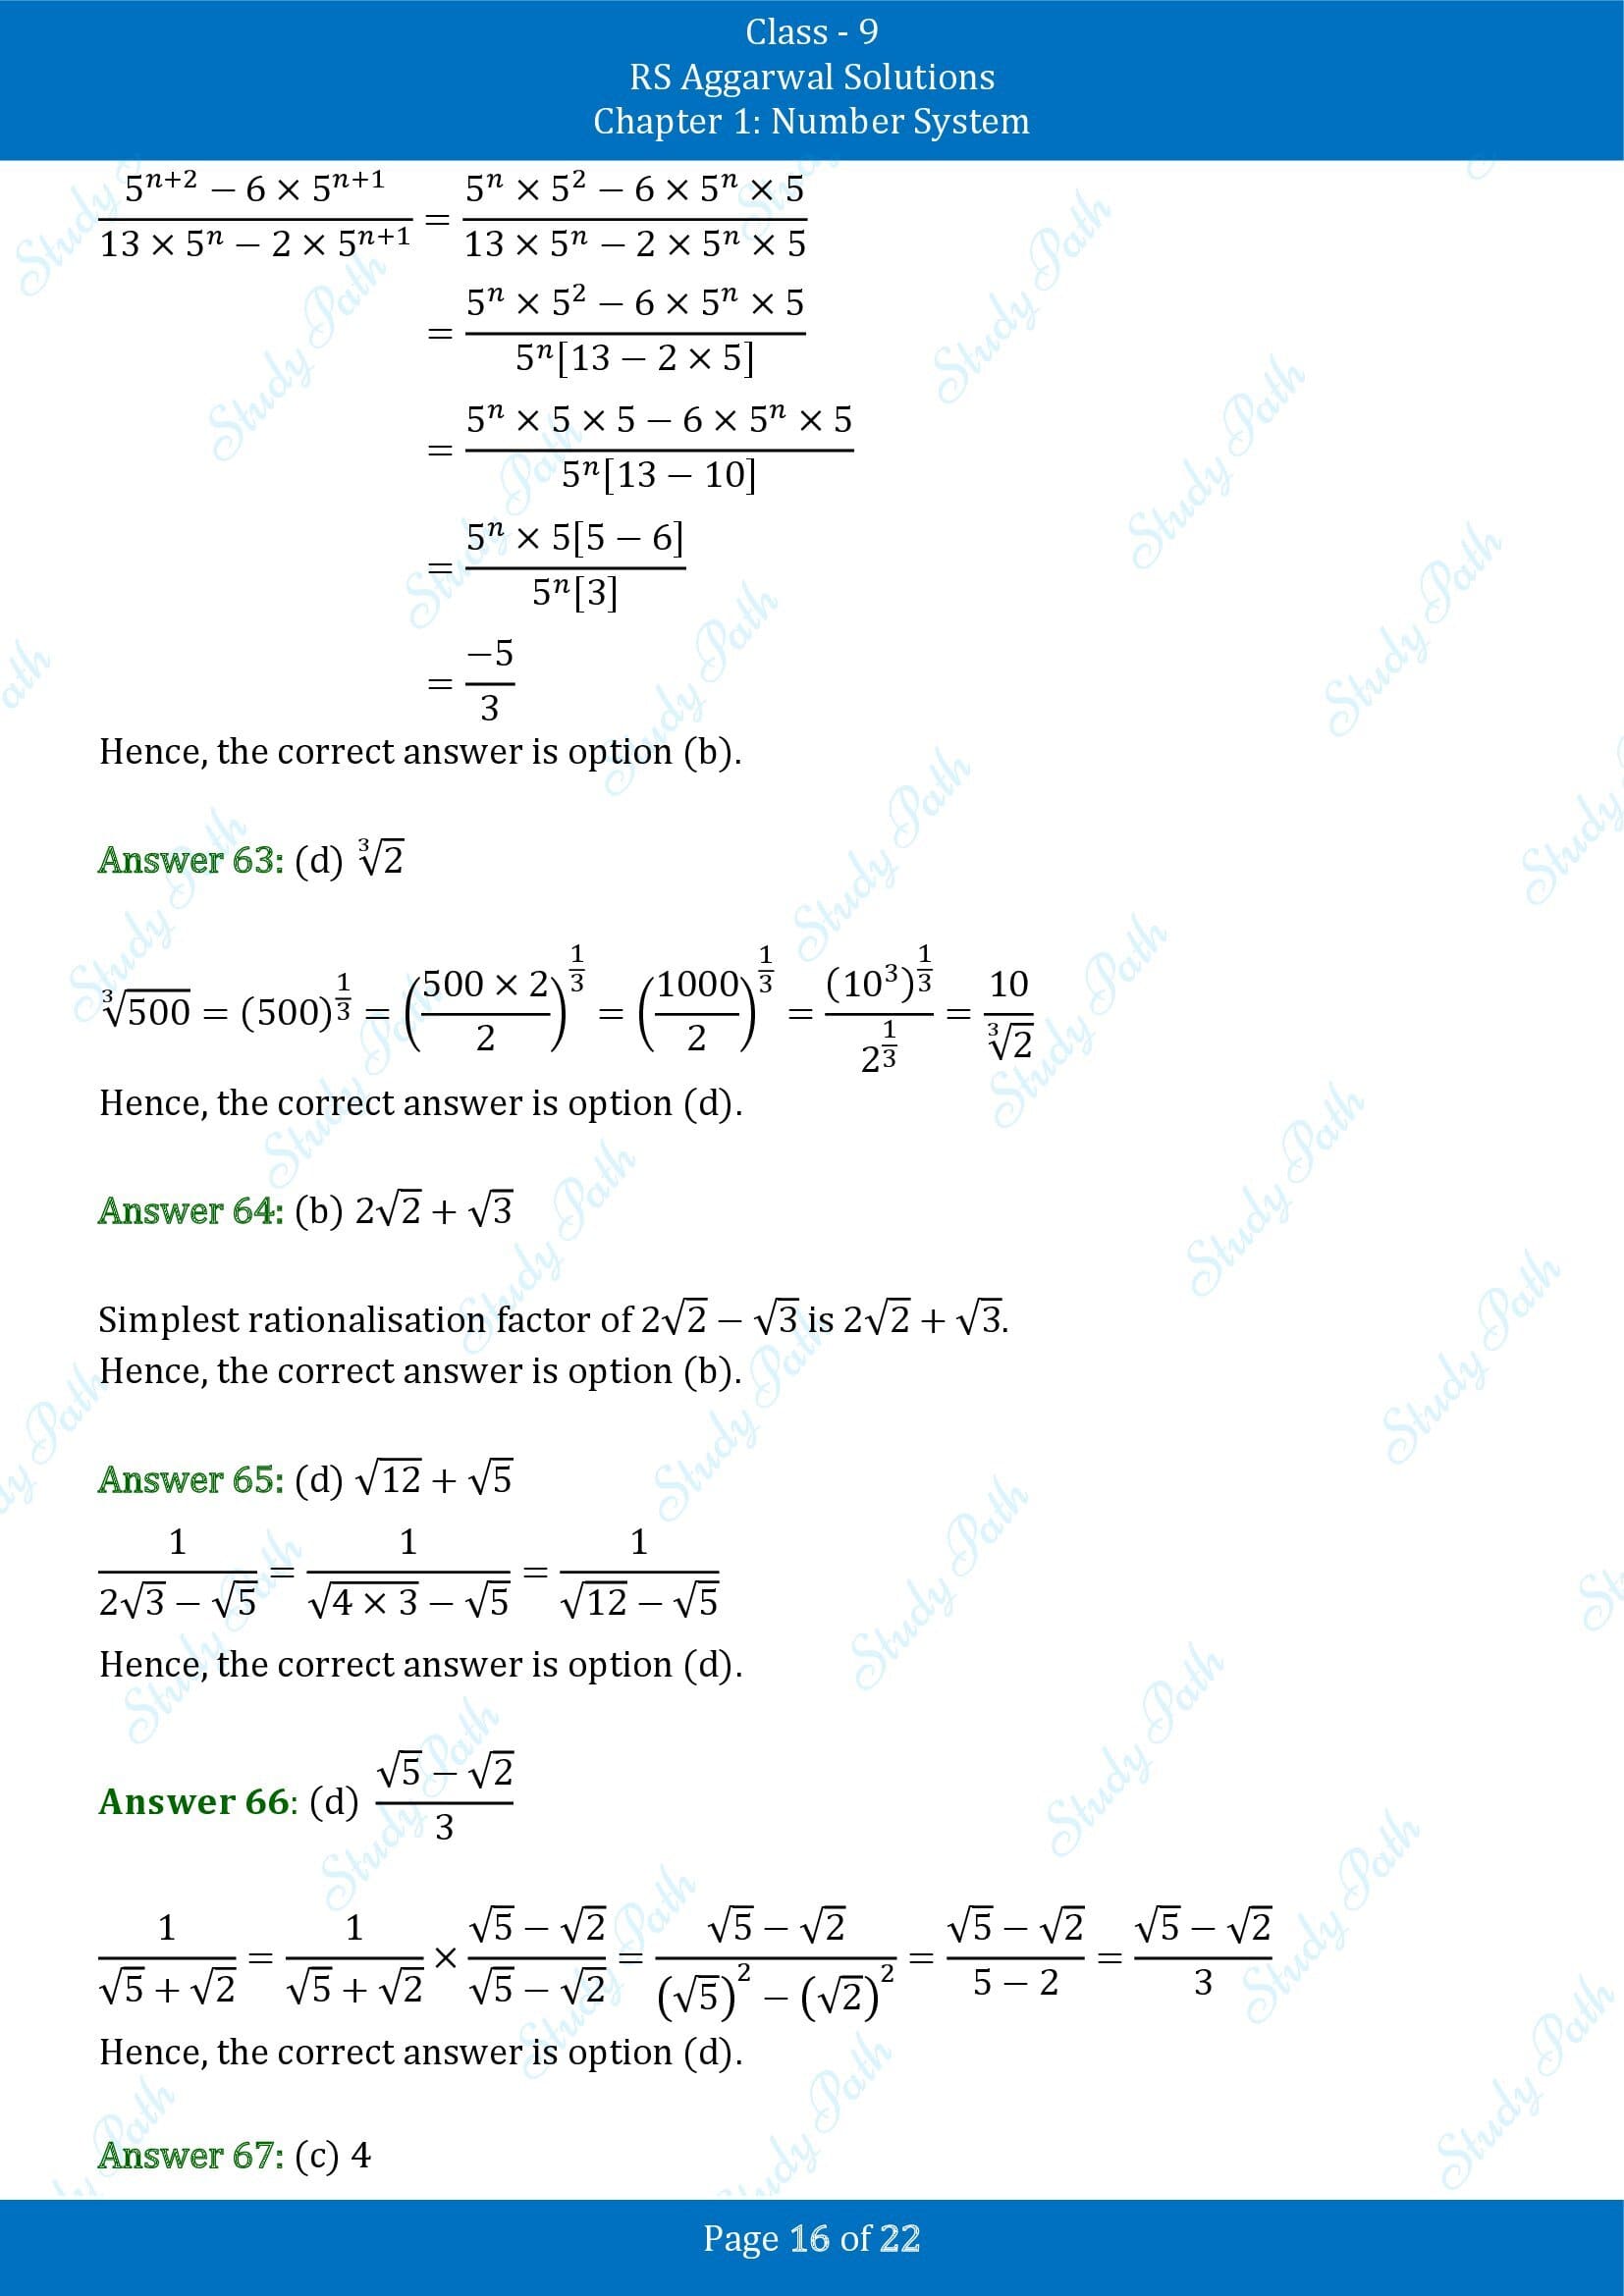 RS Aggarwal Solutions Class 9 Chapter 1 Number System Multiple Choice Questions MCQs 00016